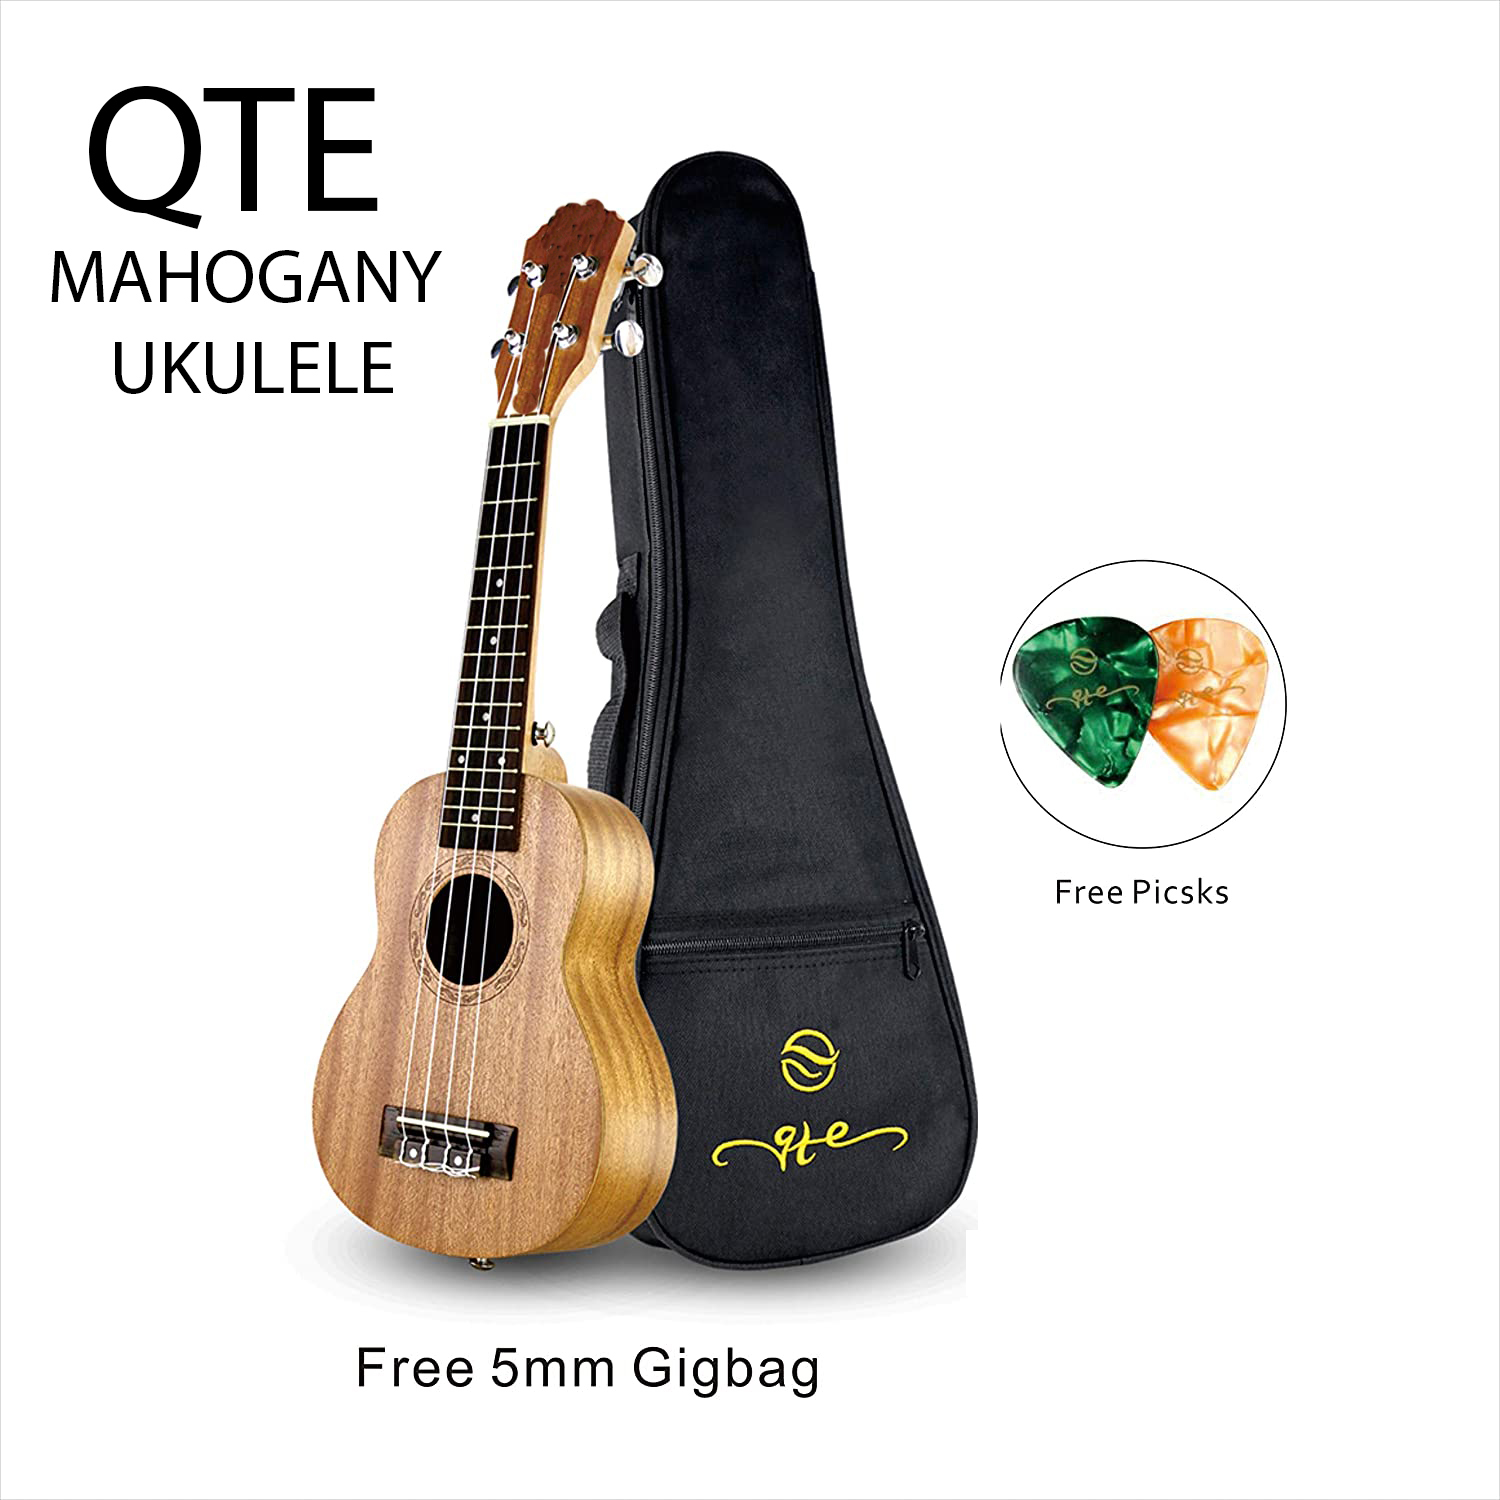 Qte Concert Ukulele Musical Instruments Spruce Mahogany 24 inch natural with Gigbag